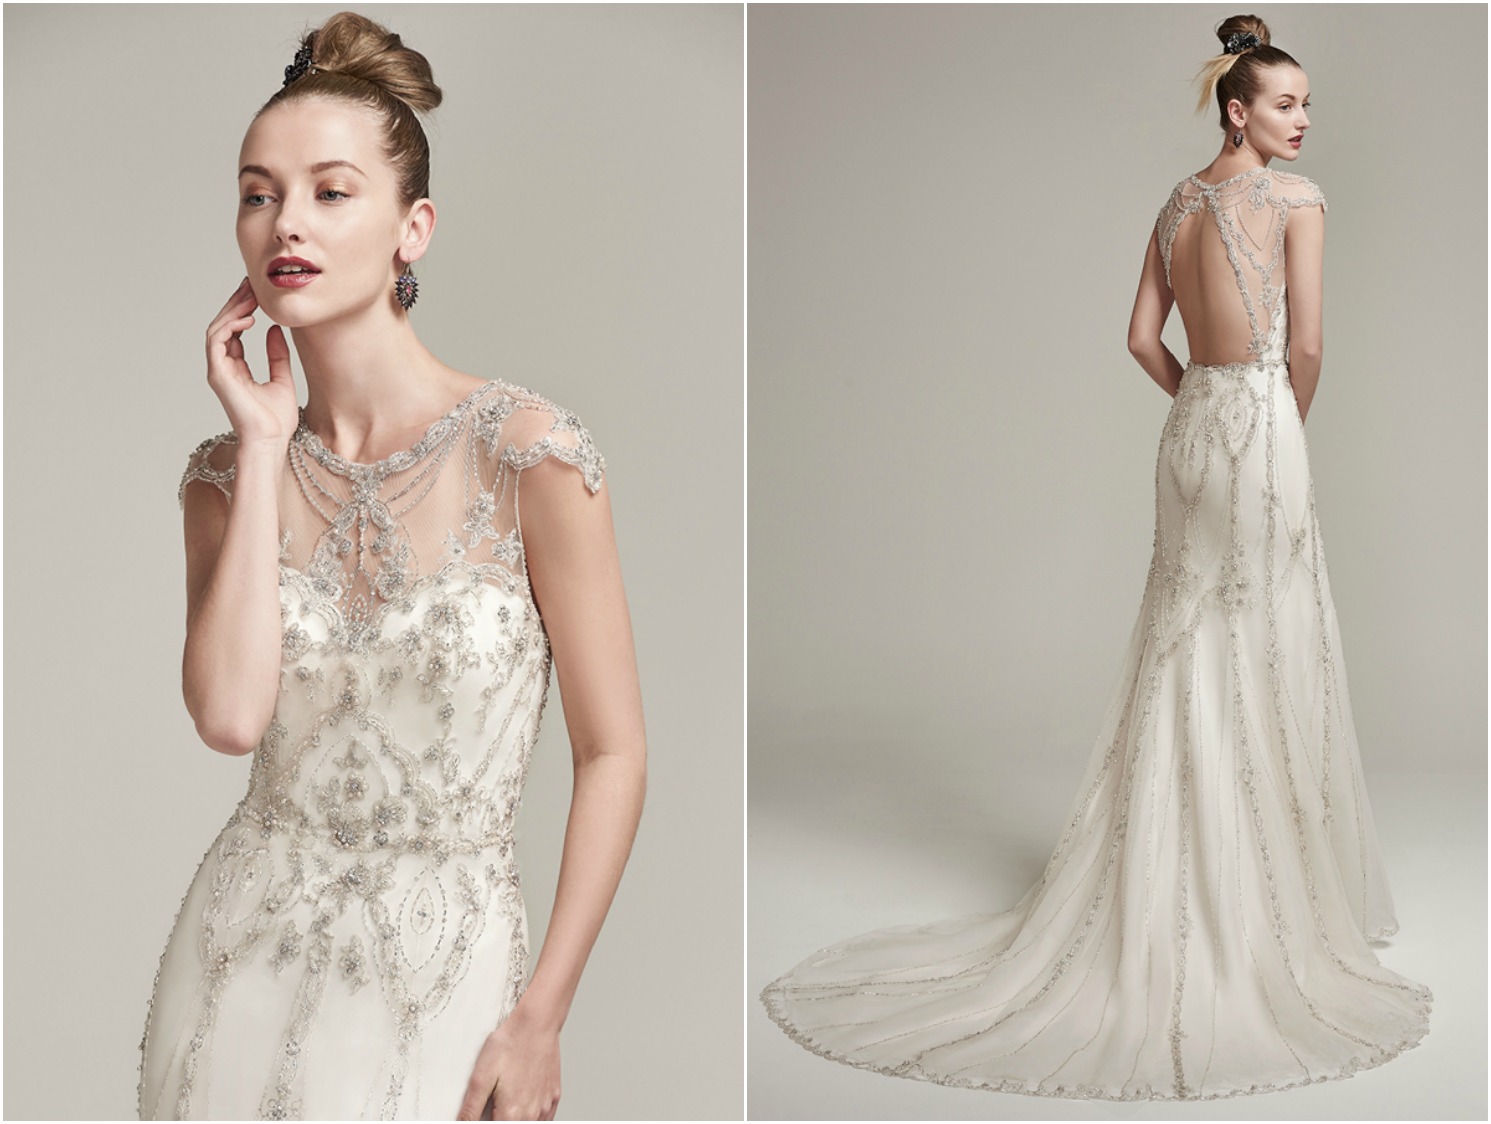 Eye-catching beading adorns the sleek silhouette of this tulle sheath wedding dress, featuring an artistically embellished illusion neckline and cap-sleeves. Complete with stunning beaded illusion keyhole back. Finished with crystal buttons over zipper closure. 

<a href="https://www.maggiesottero.com/sottero-and-midgley/syanne/9884" target="_blank">Sottero &amp; Midgley</a>